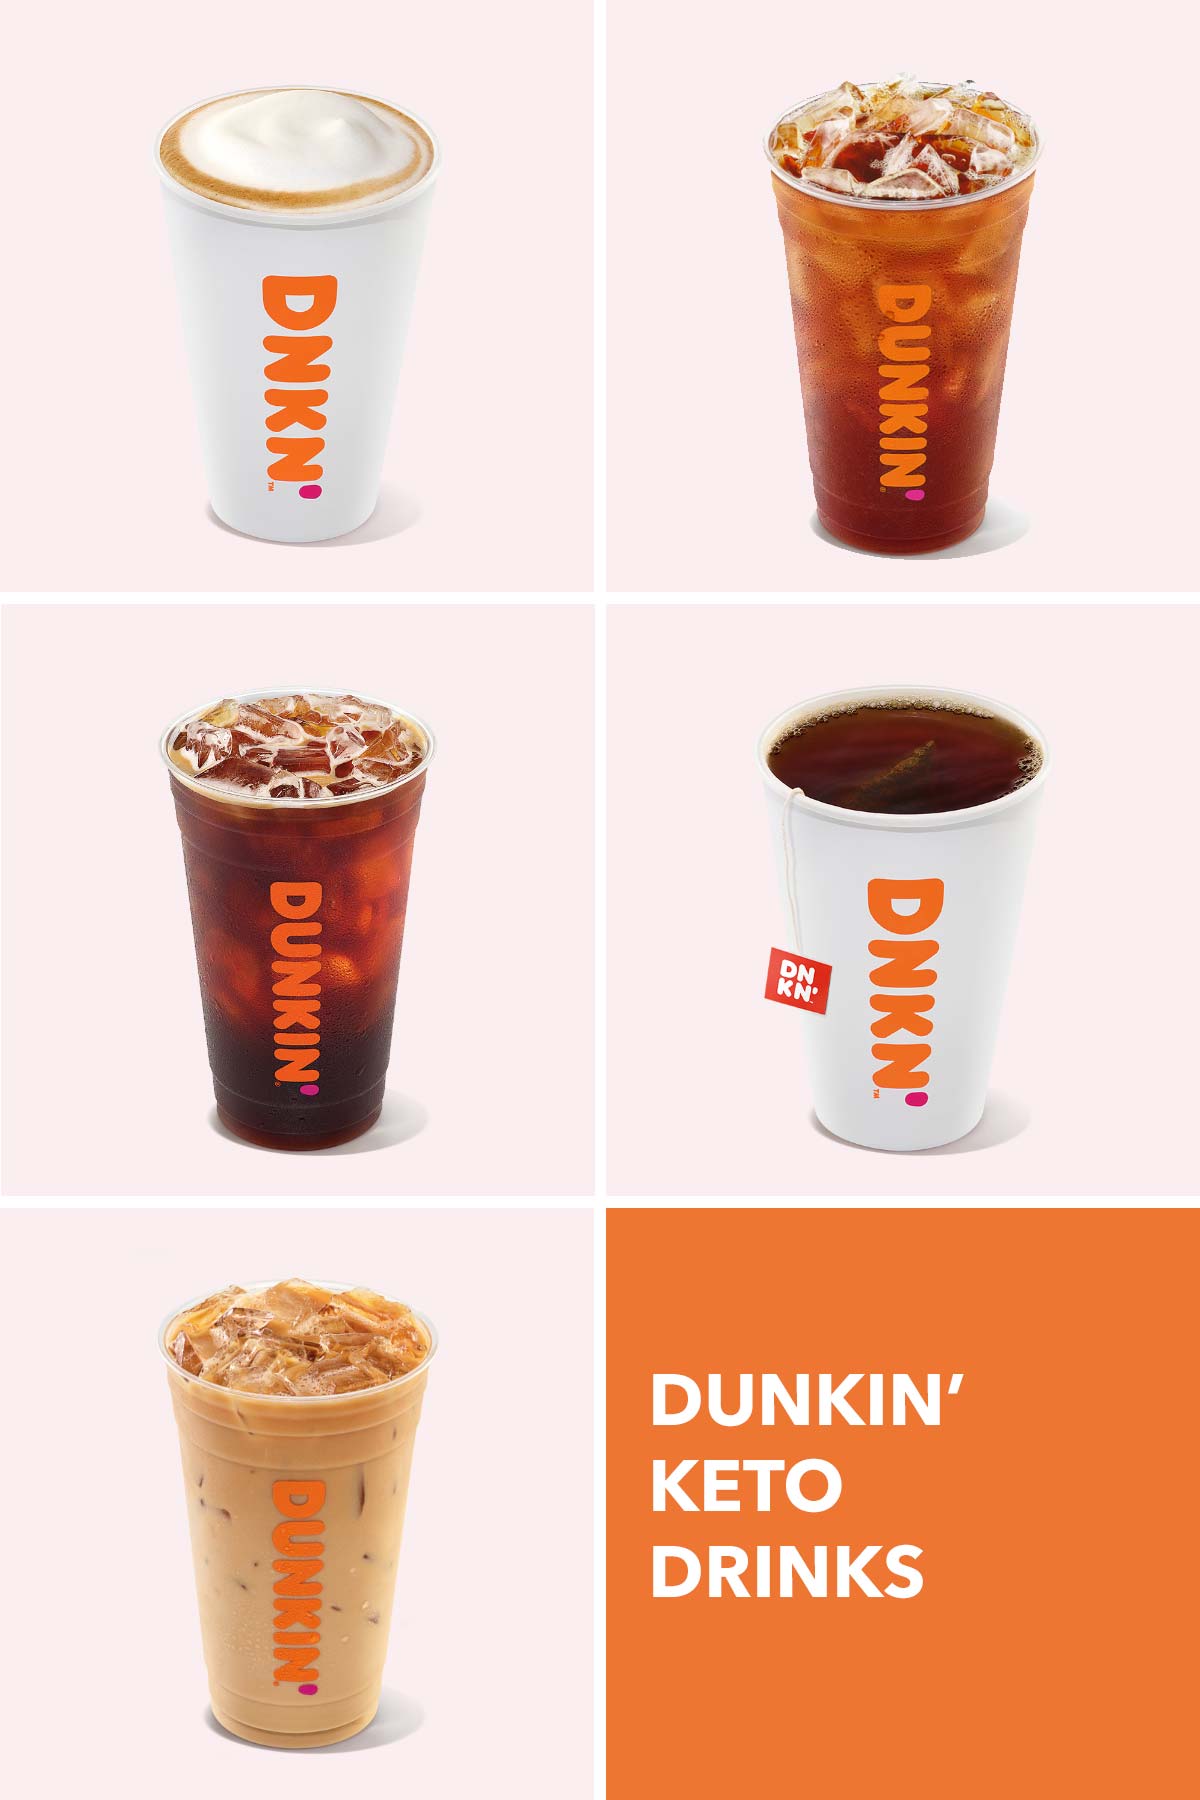 Set of drinks from Dunkin' that are keto friendly.